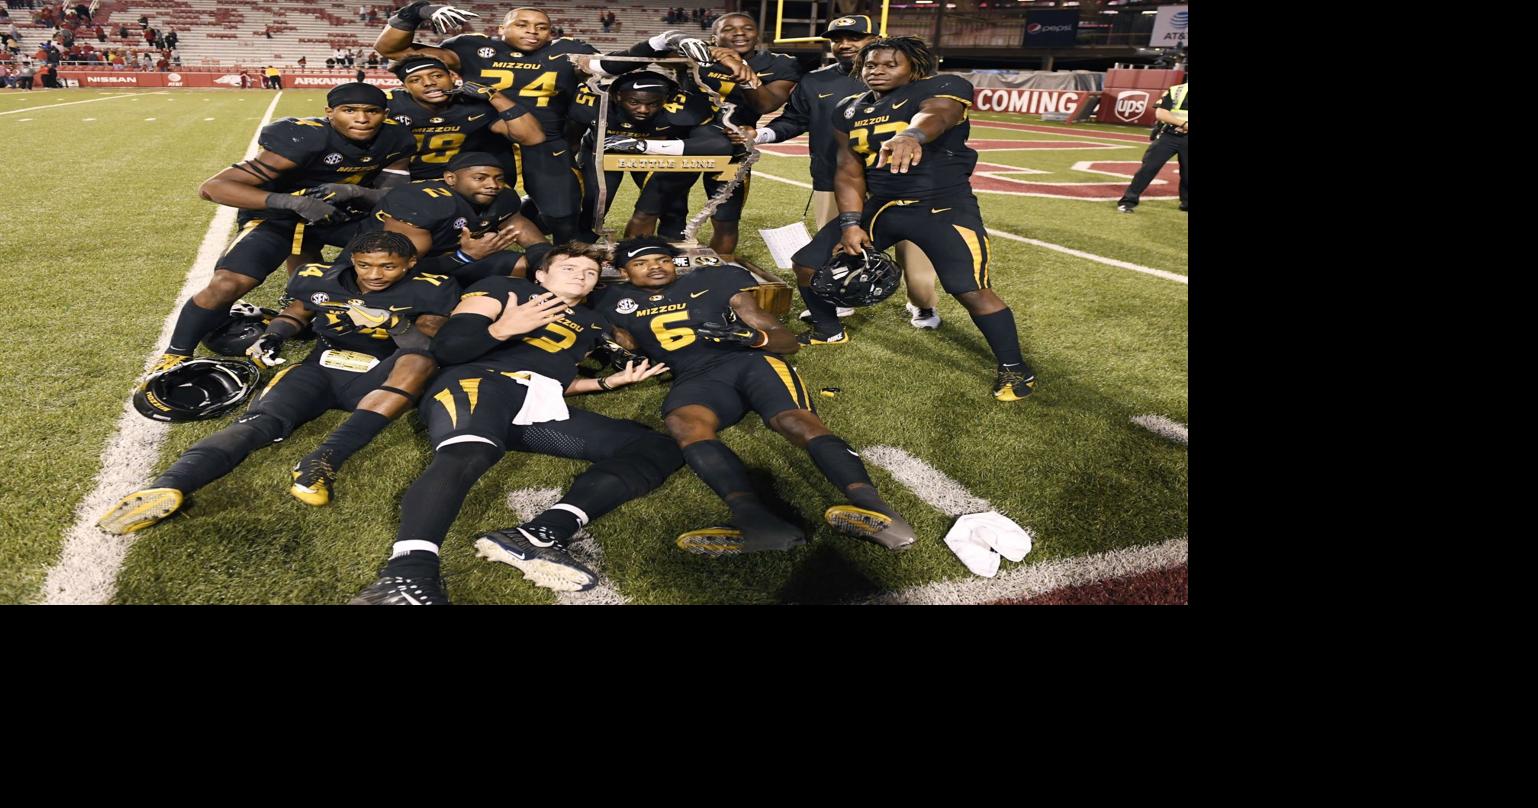 Mizzou's final drive is perfect ending to perfect second half of season